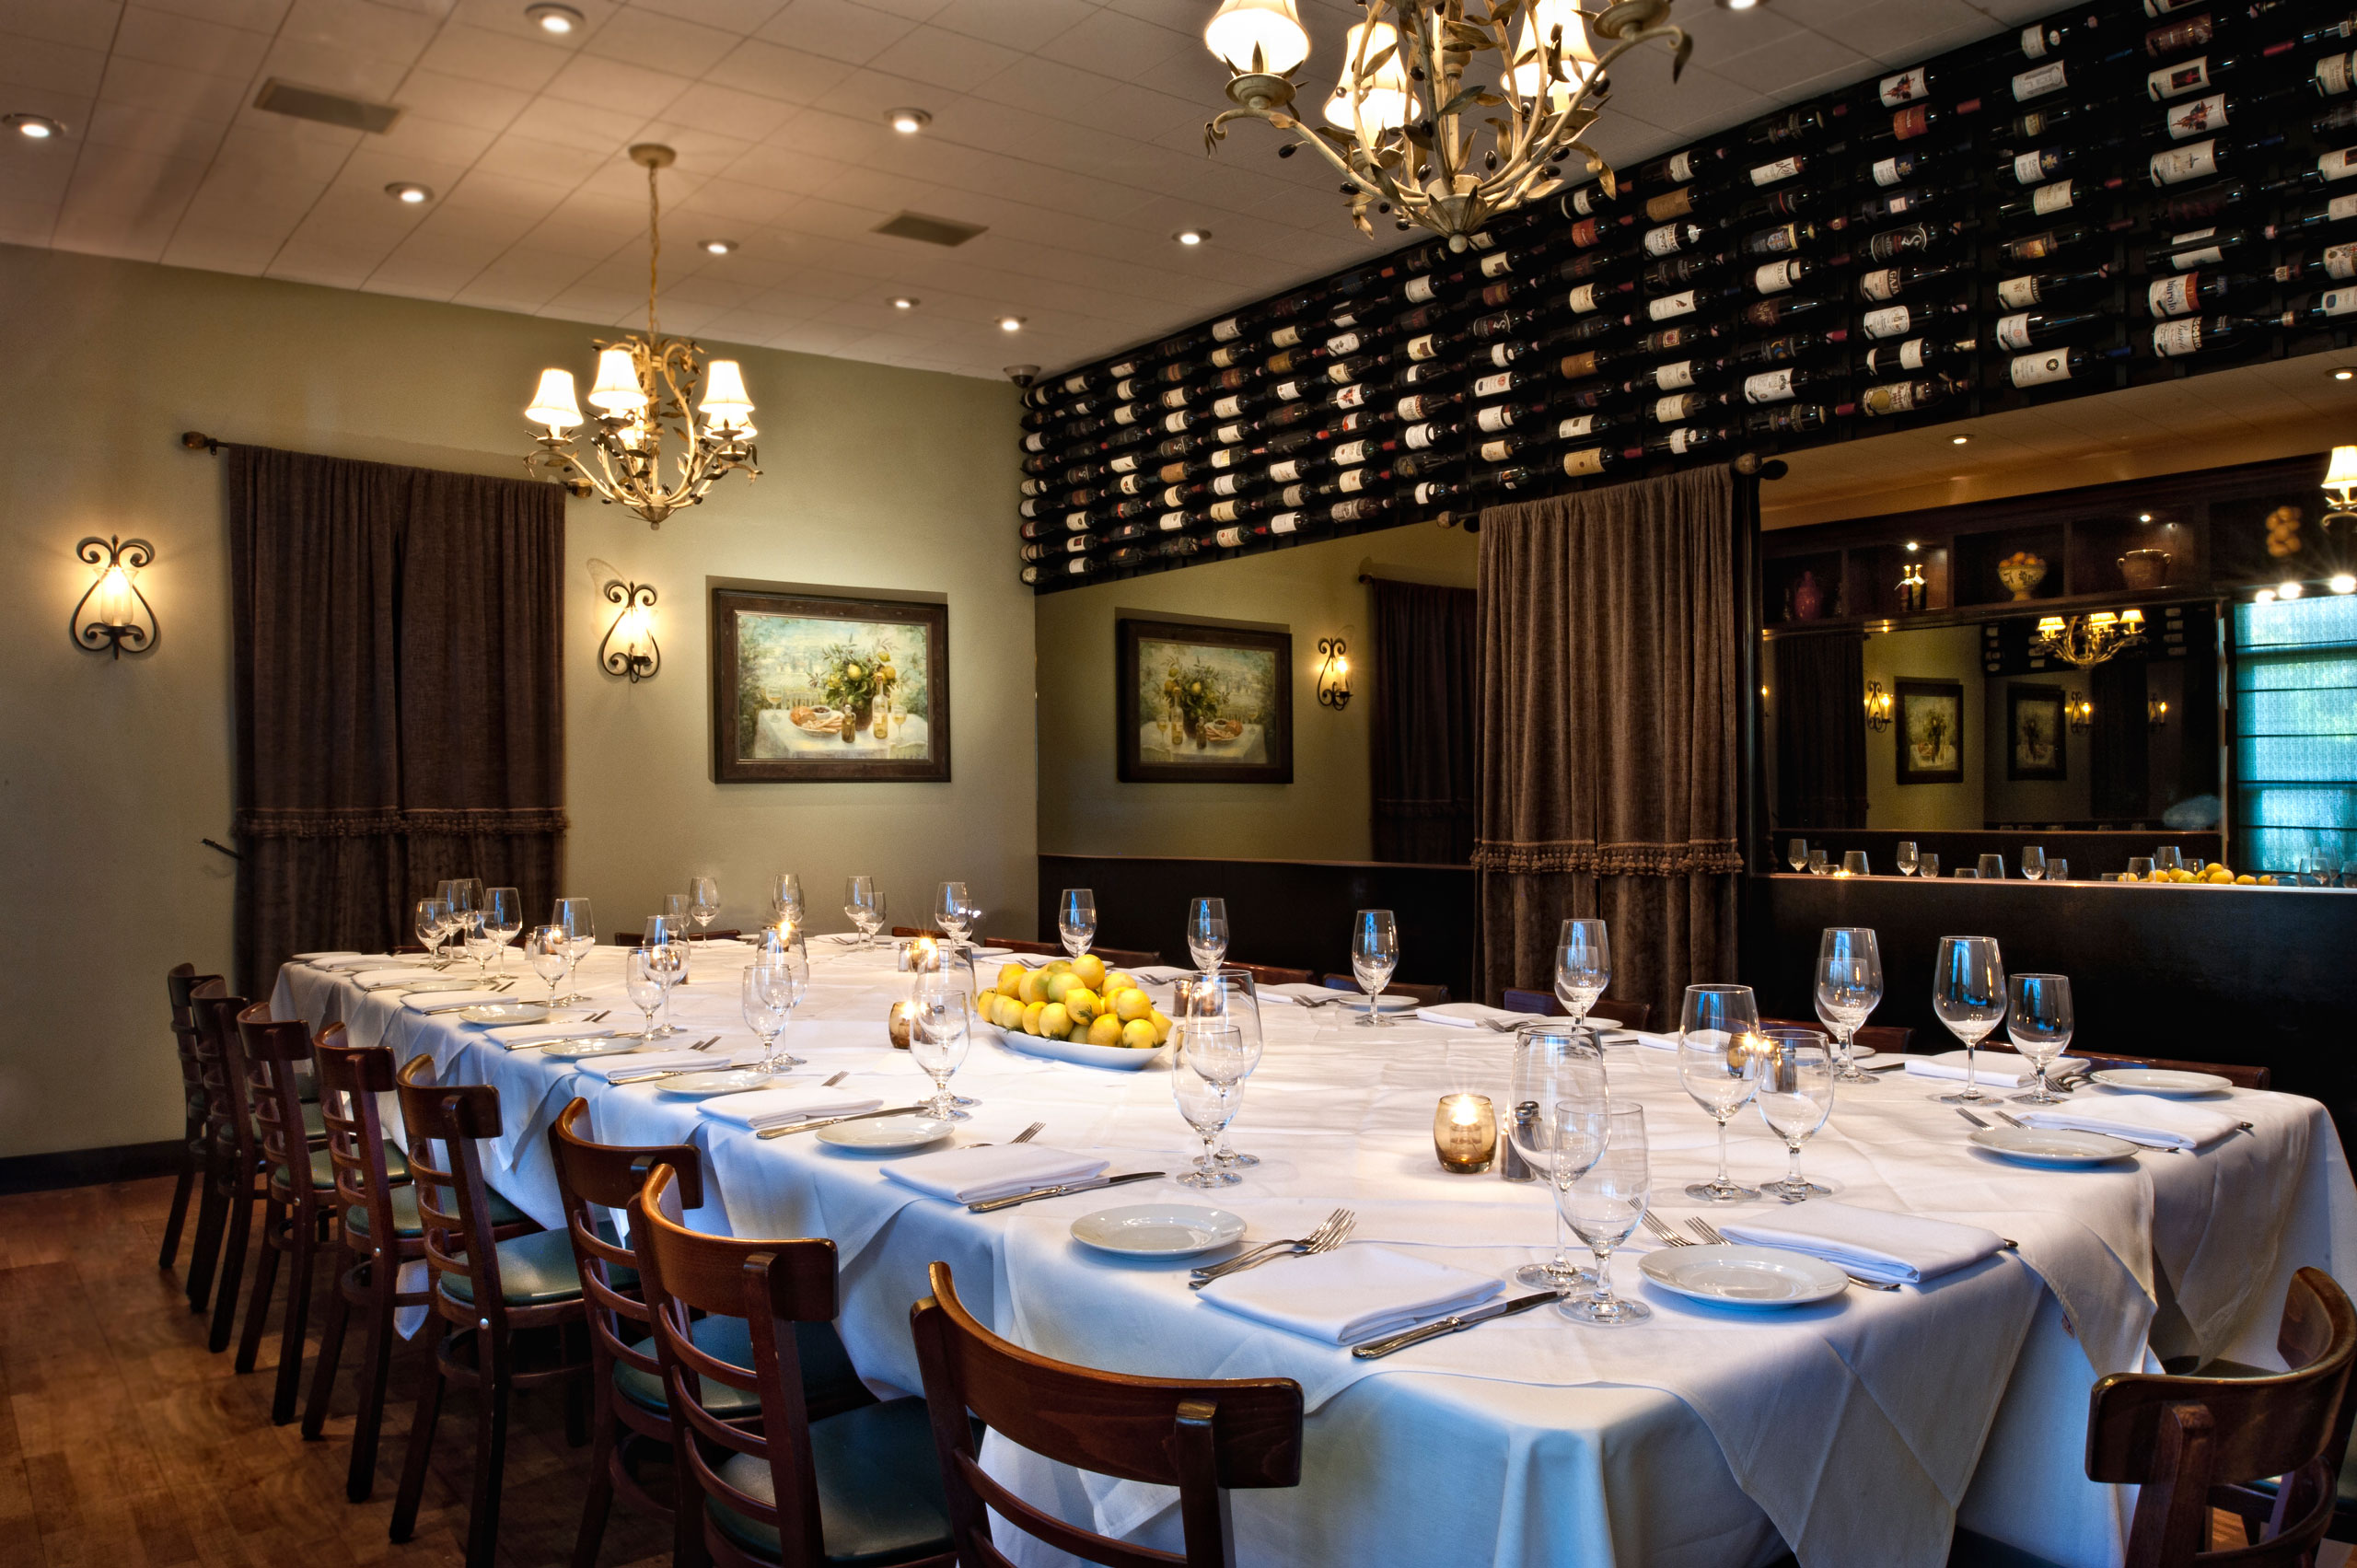 Cucina Room Imperial table configuration for up to 20 guests.